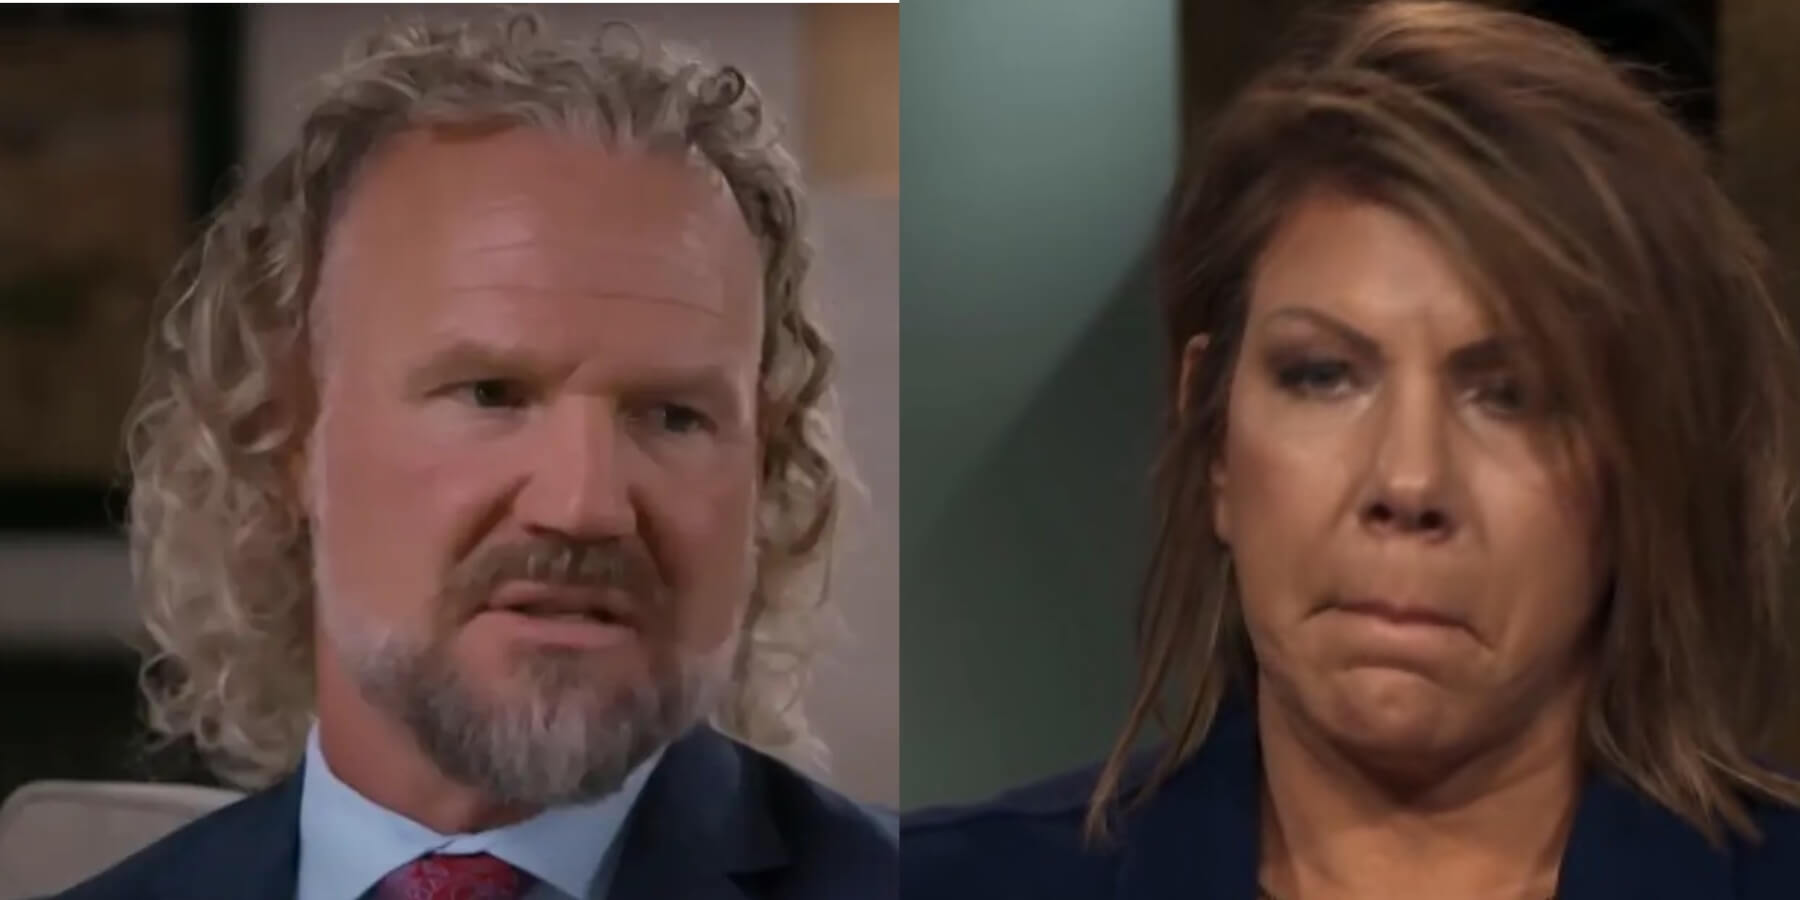 Kody Brown and Meri Brown in side-by-side photos from 'Sister Wives' tell all, season 18 part 2.